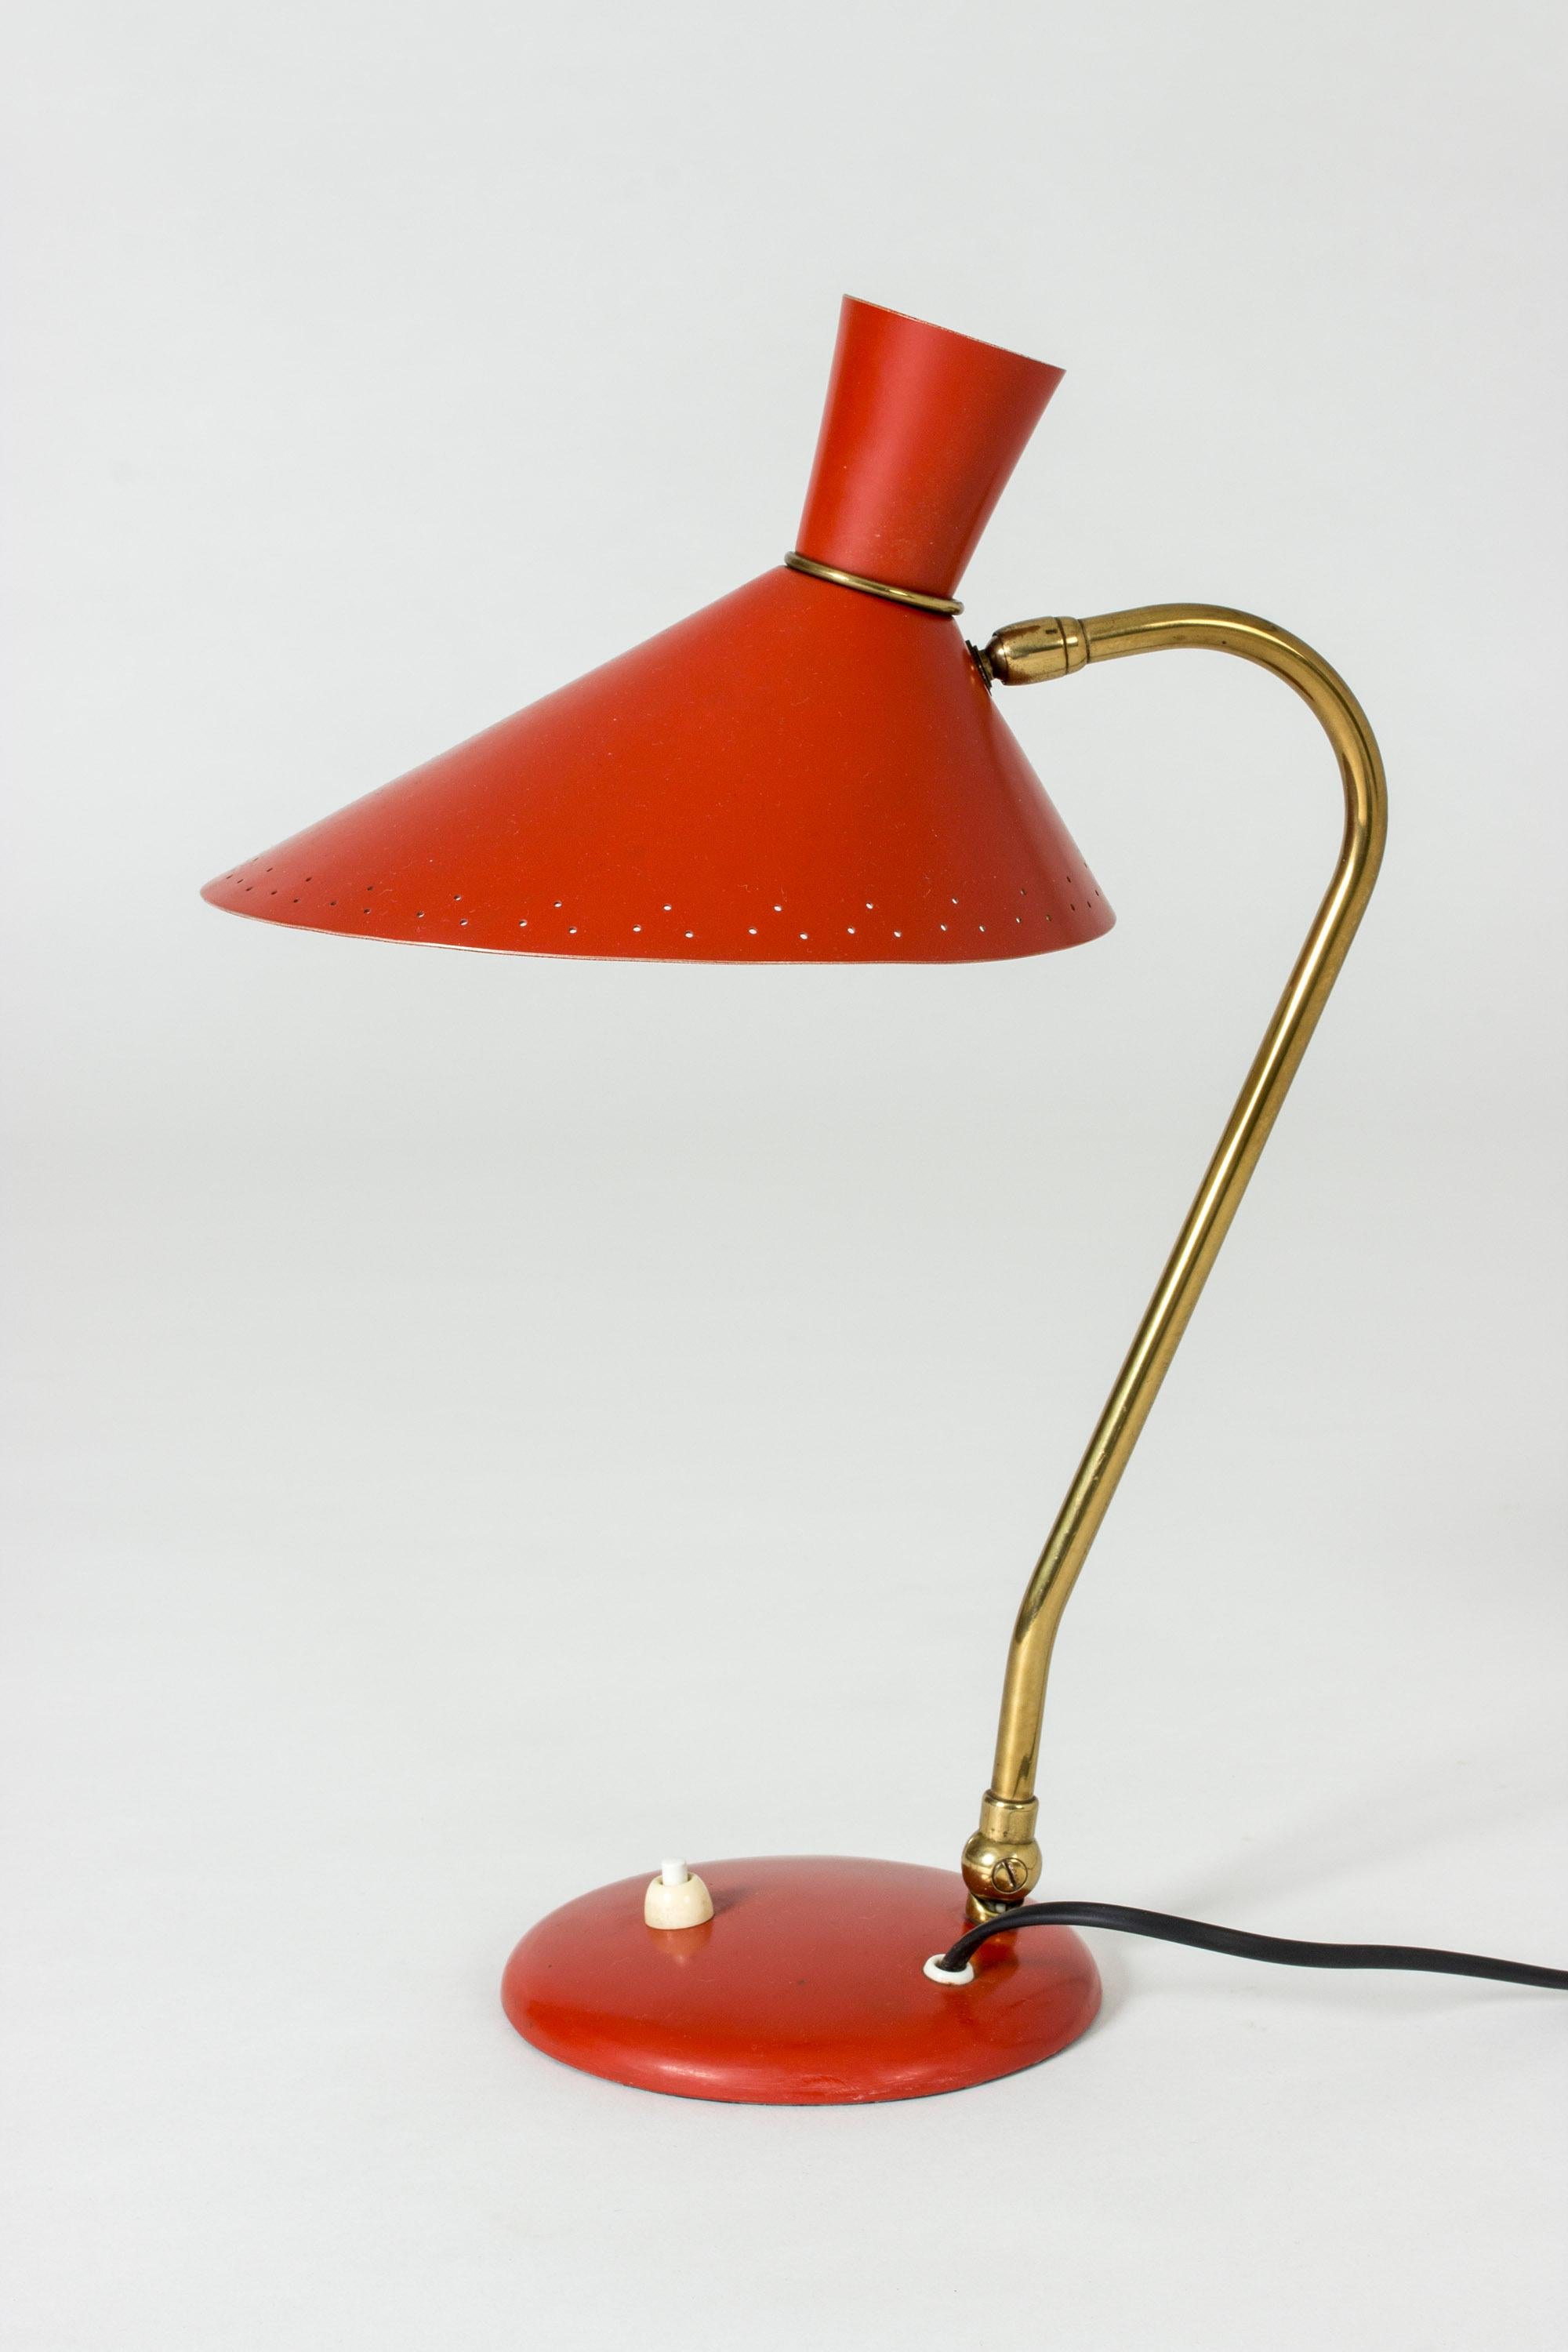 Very neat table lamp by Svend Aage Holm Sørensen, made from metal with original red lacquer. Nice pattern of punched out holes around the edge of the shade.